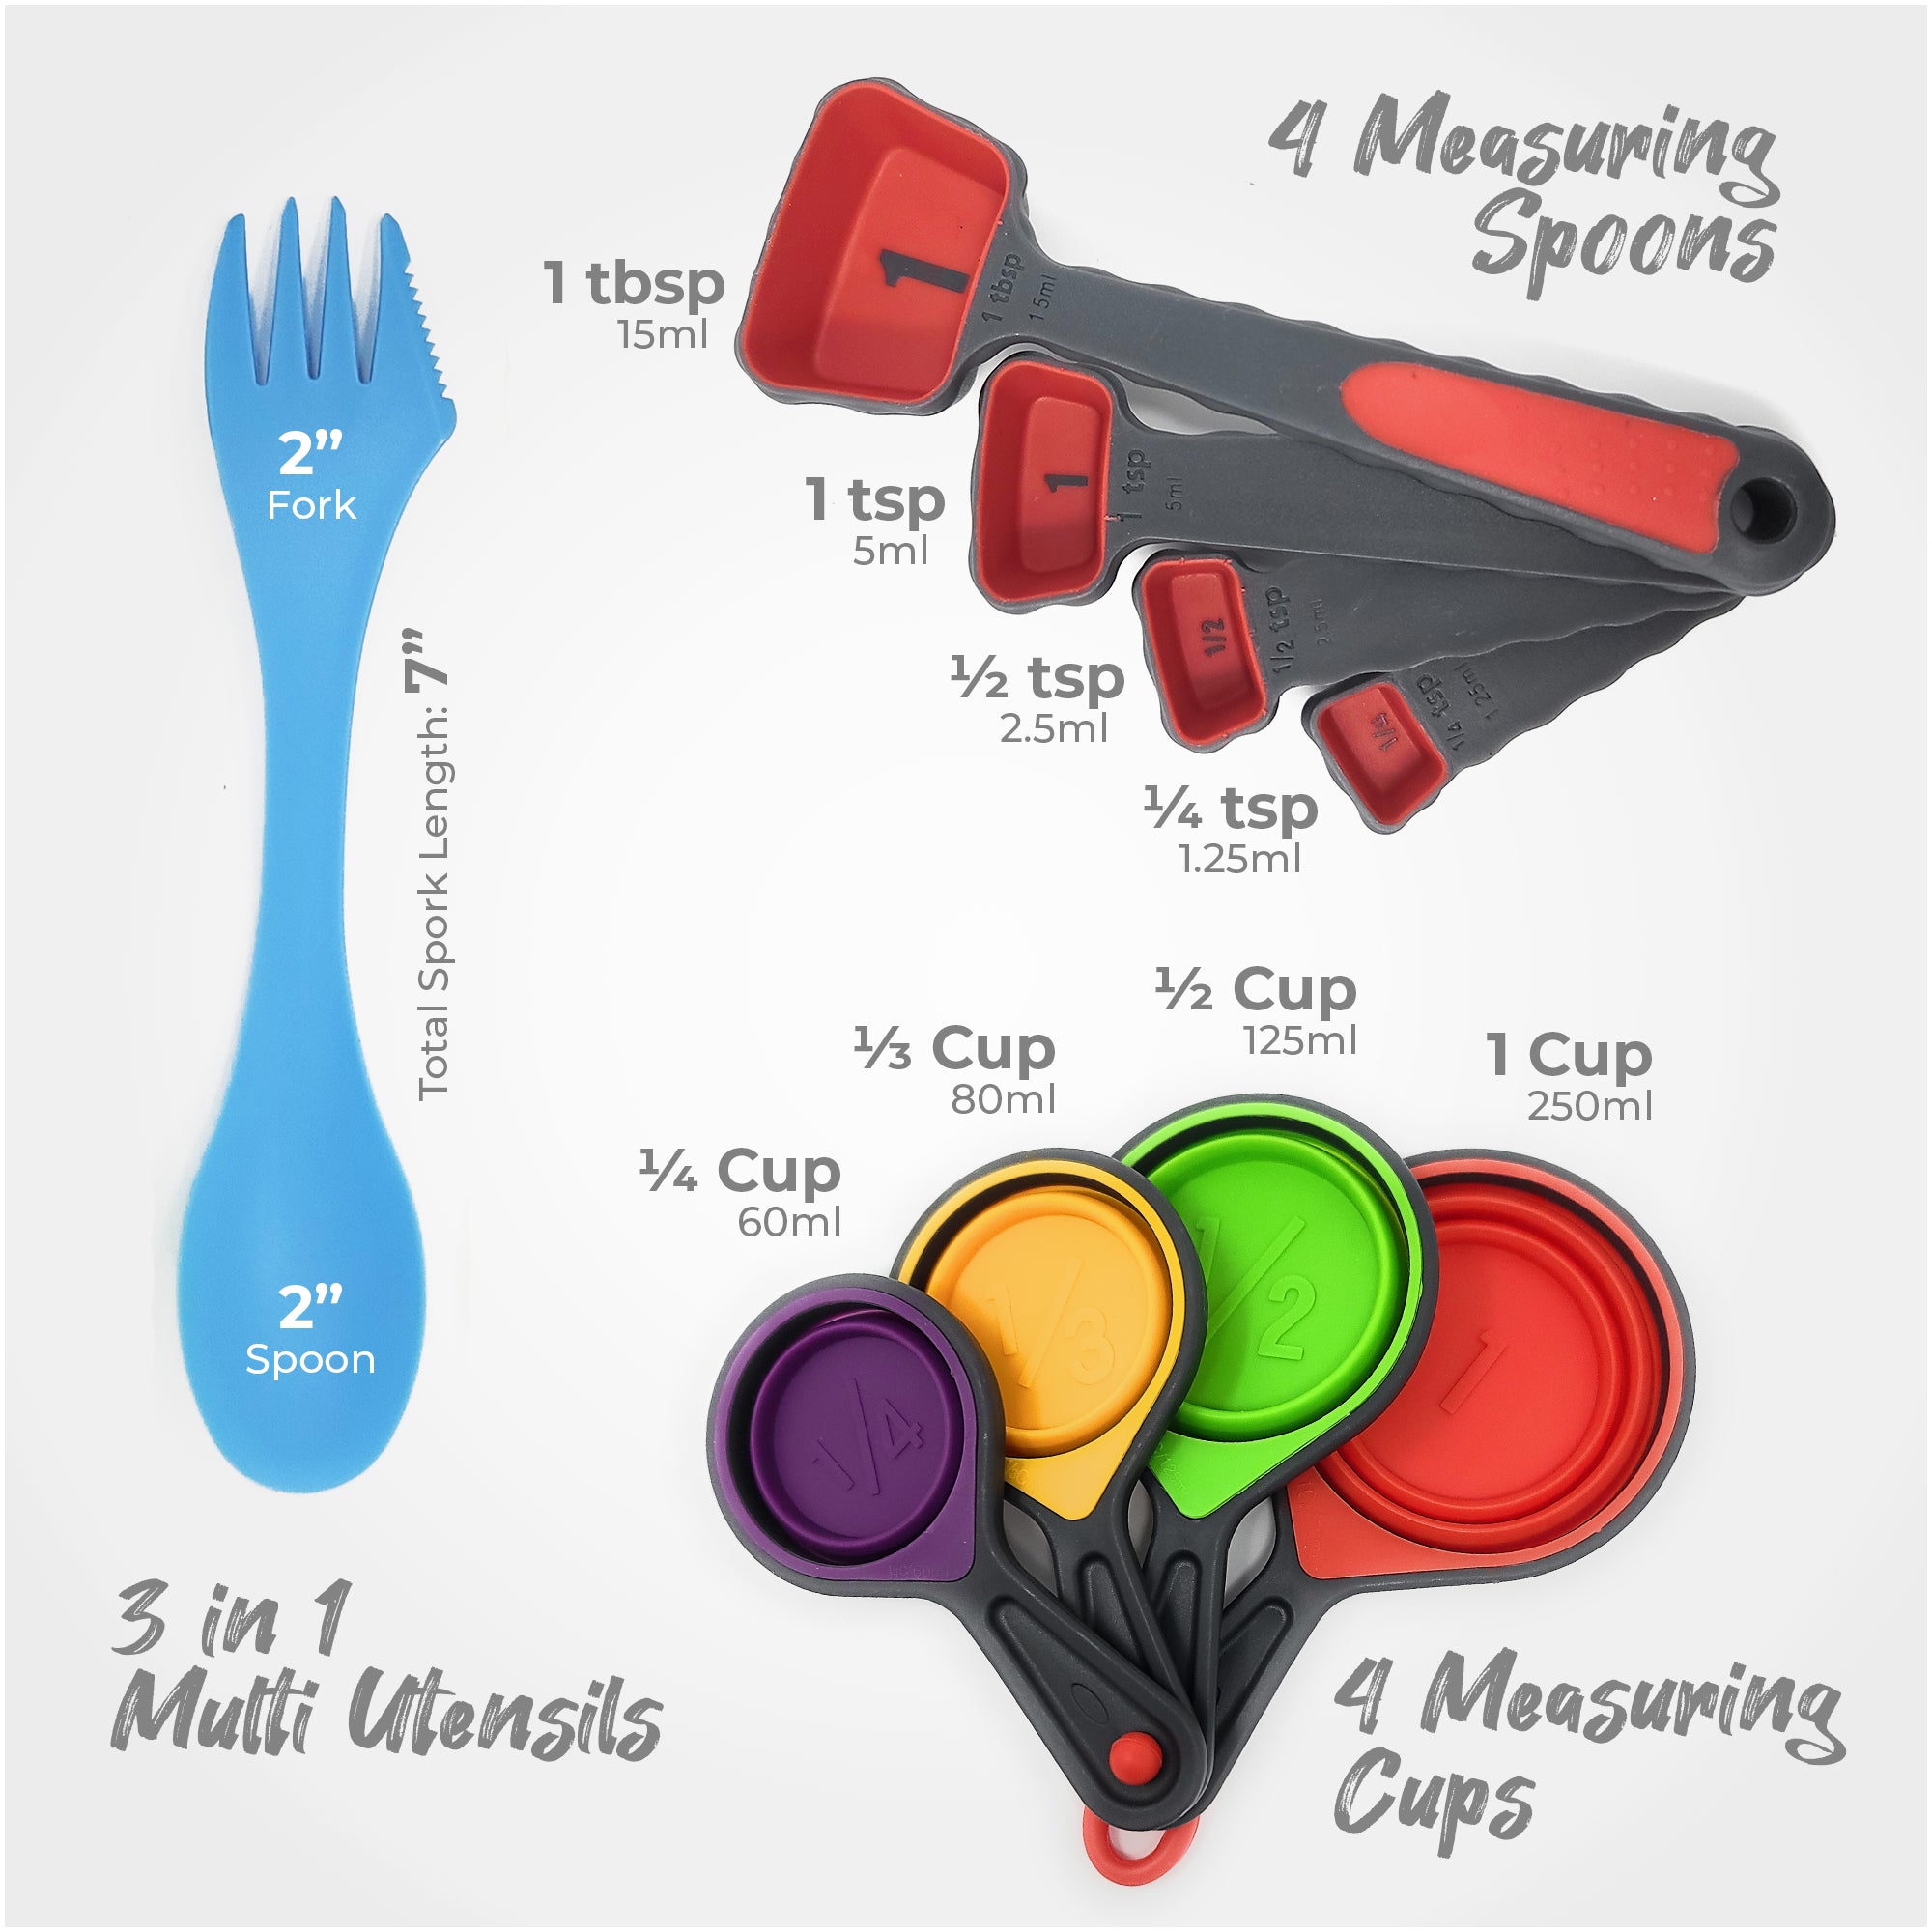 Foldable Silicone Measuring Cups and Measuring Spoons Set